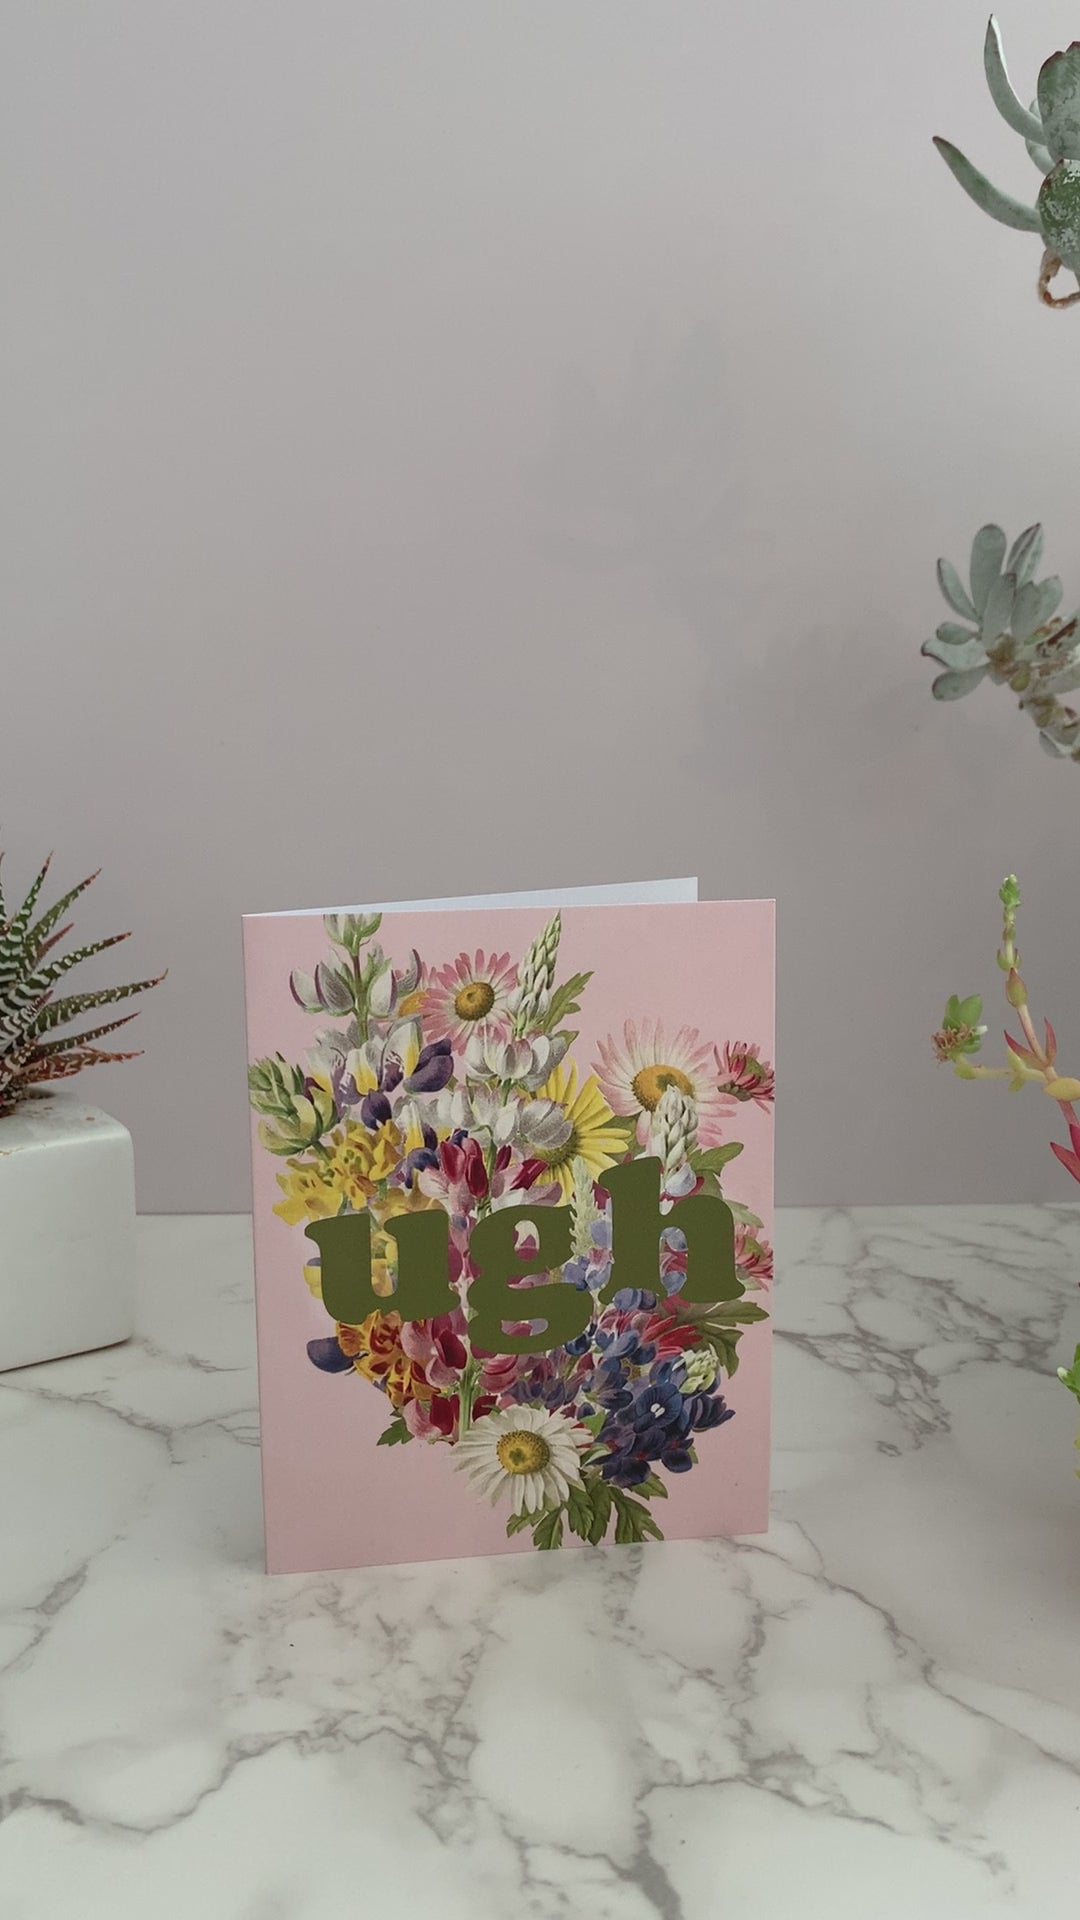 Pretty greeting card with vintage flowers and a pink background, the greeting says, Ugh on the front in green letters. Blank inside. for sympathy loss grief anxiety overwhelm missing you im sorry apology fired breakup divorce hardship life problems coin laundry montana